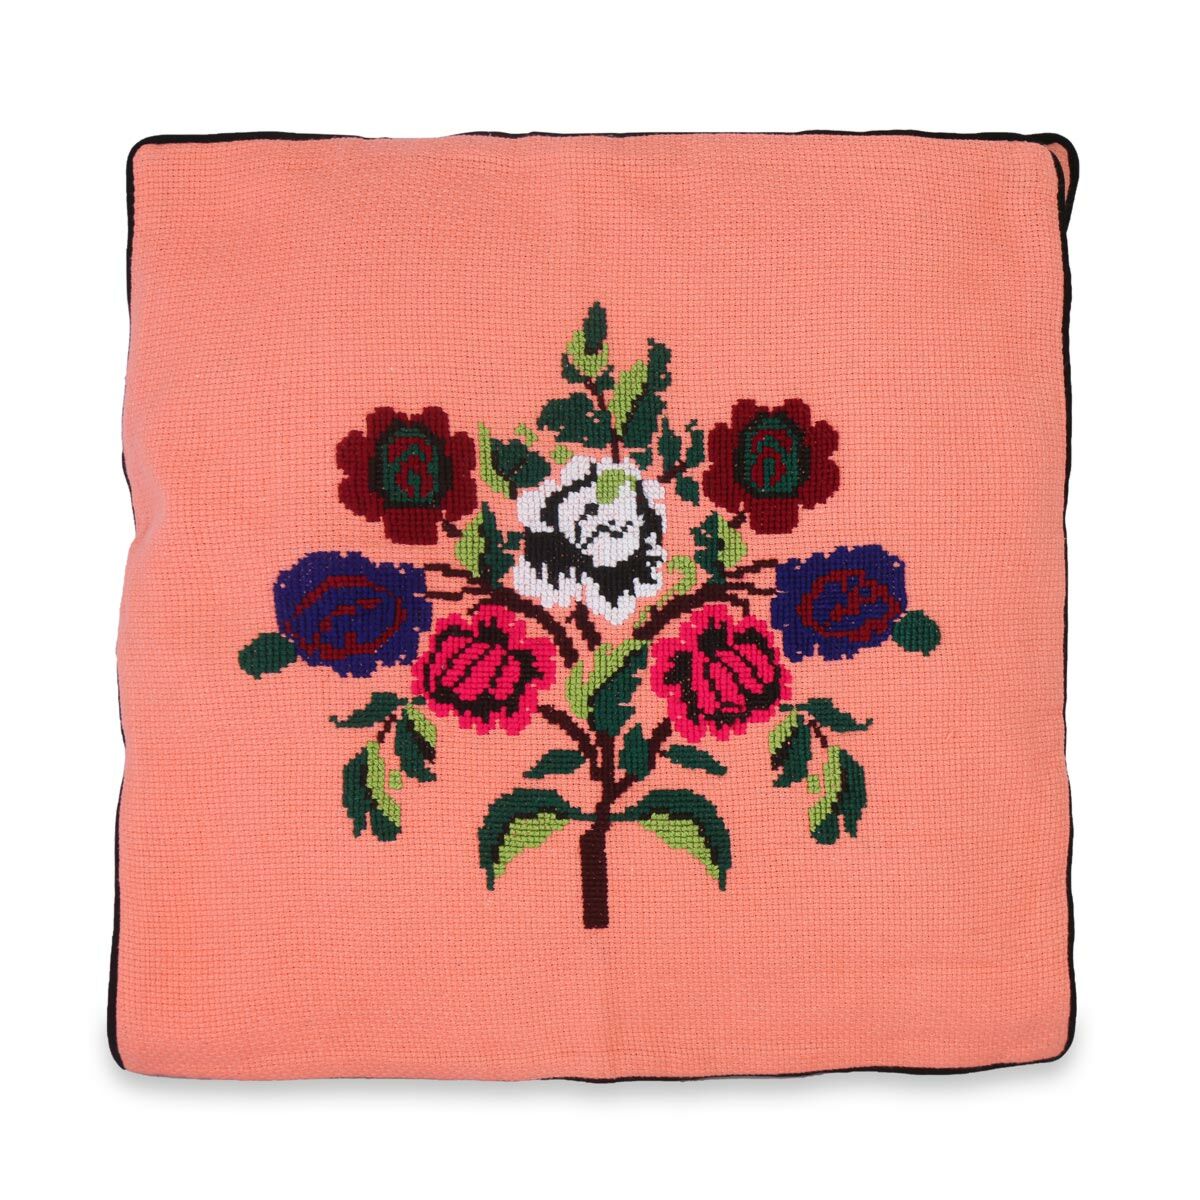 Floral Stitched Pillowcase | Salmon Red Pillowcase 